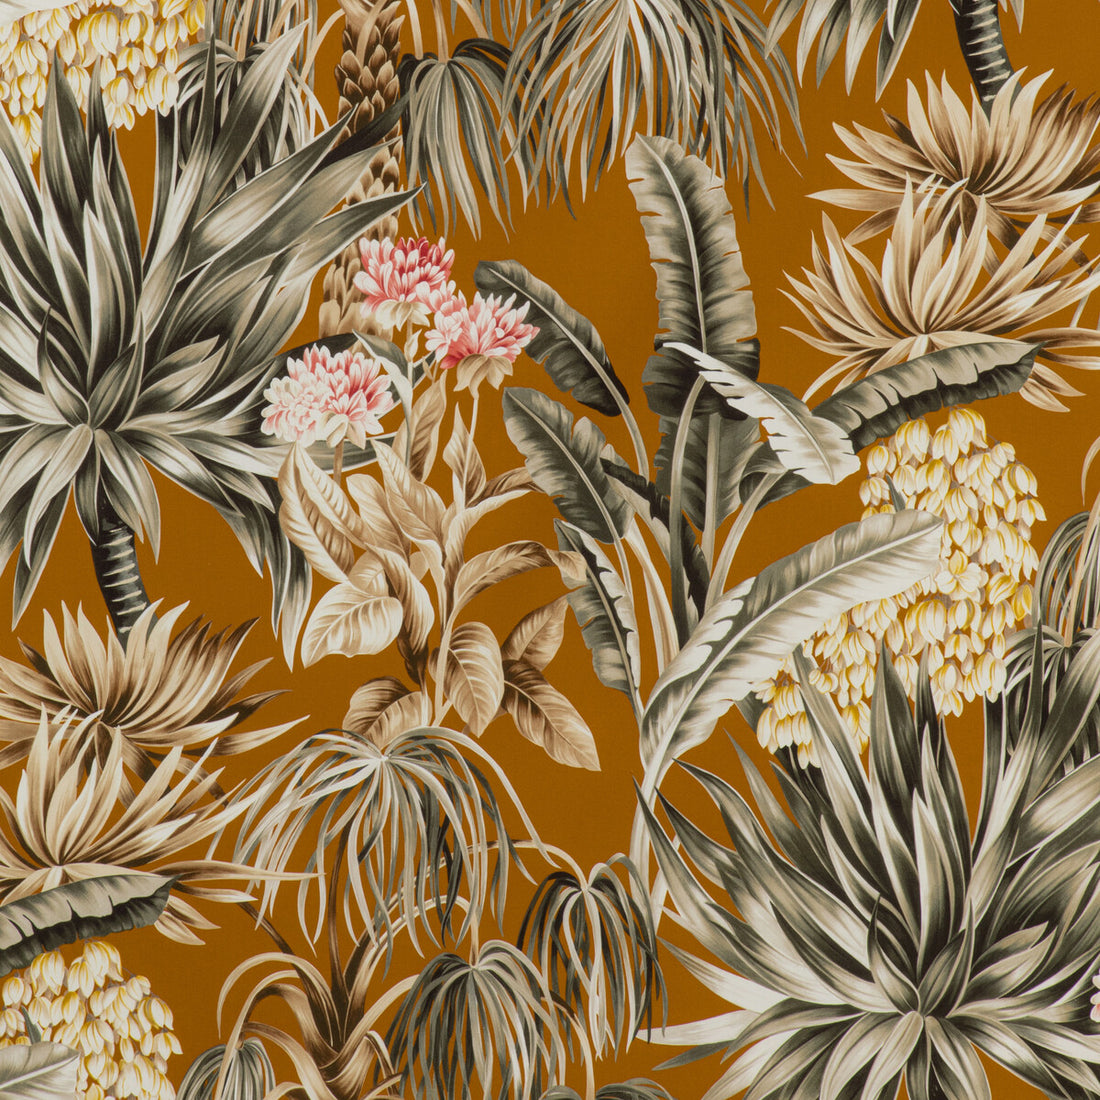 Caluya Print fabric in bronze color - pattern 2020196.2274.0 - by Lee Jofa in the Mindoro collection